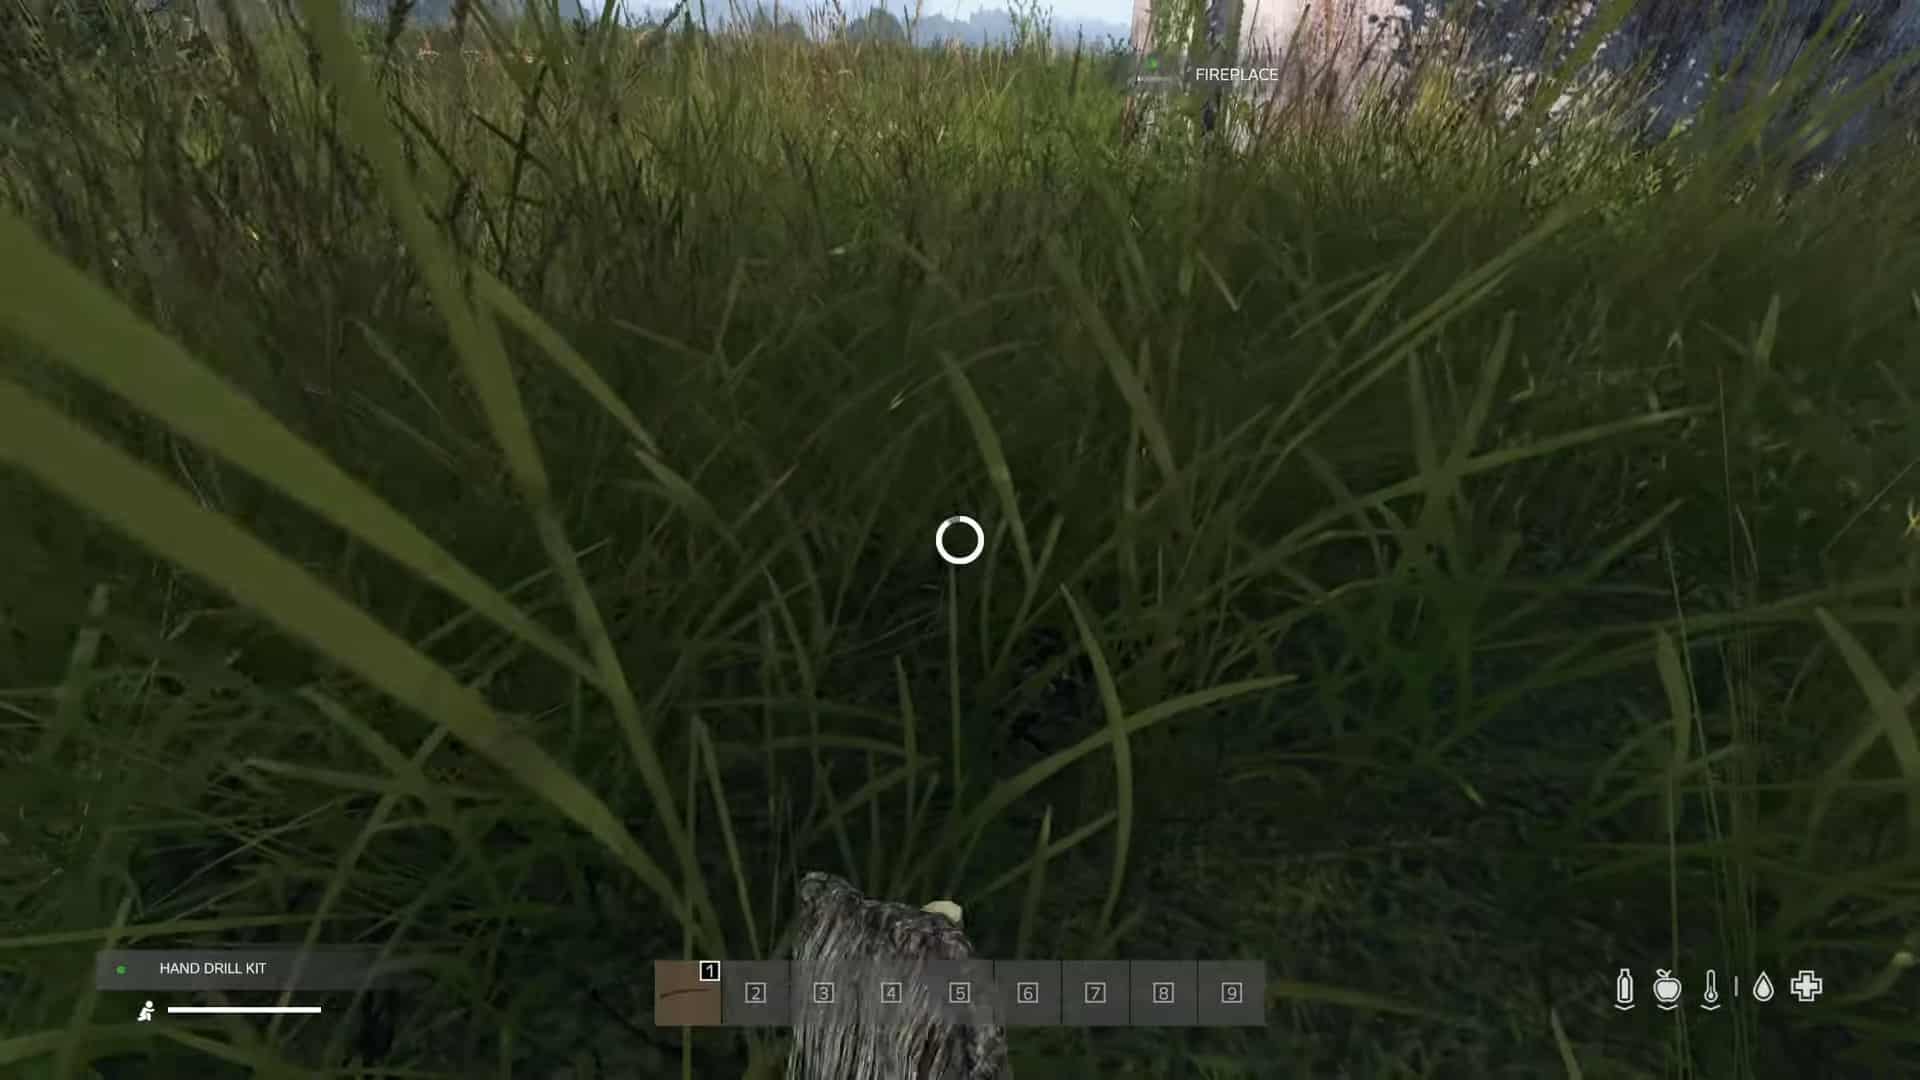 Using a hand drill to ignite a fire in DayZ while laying in grass